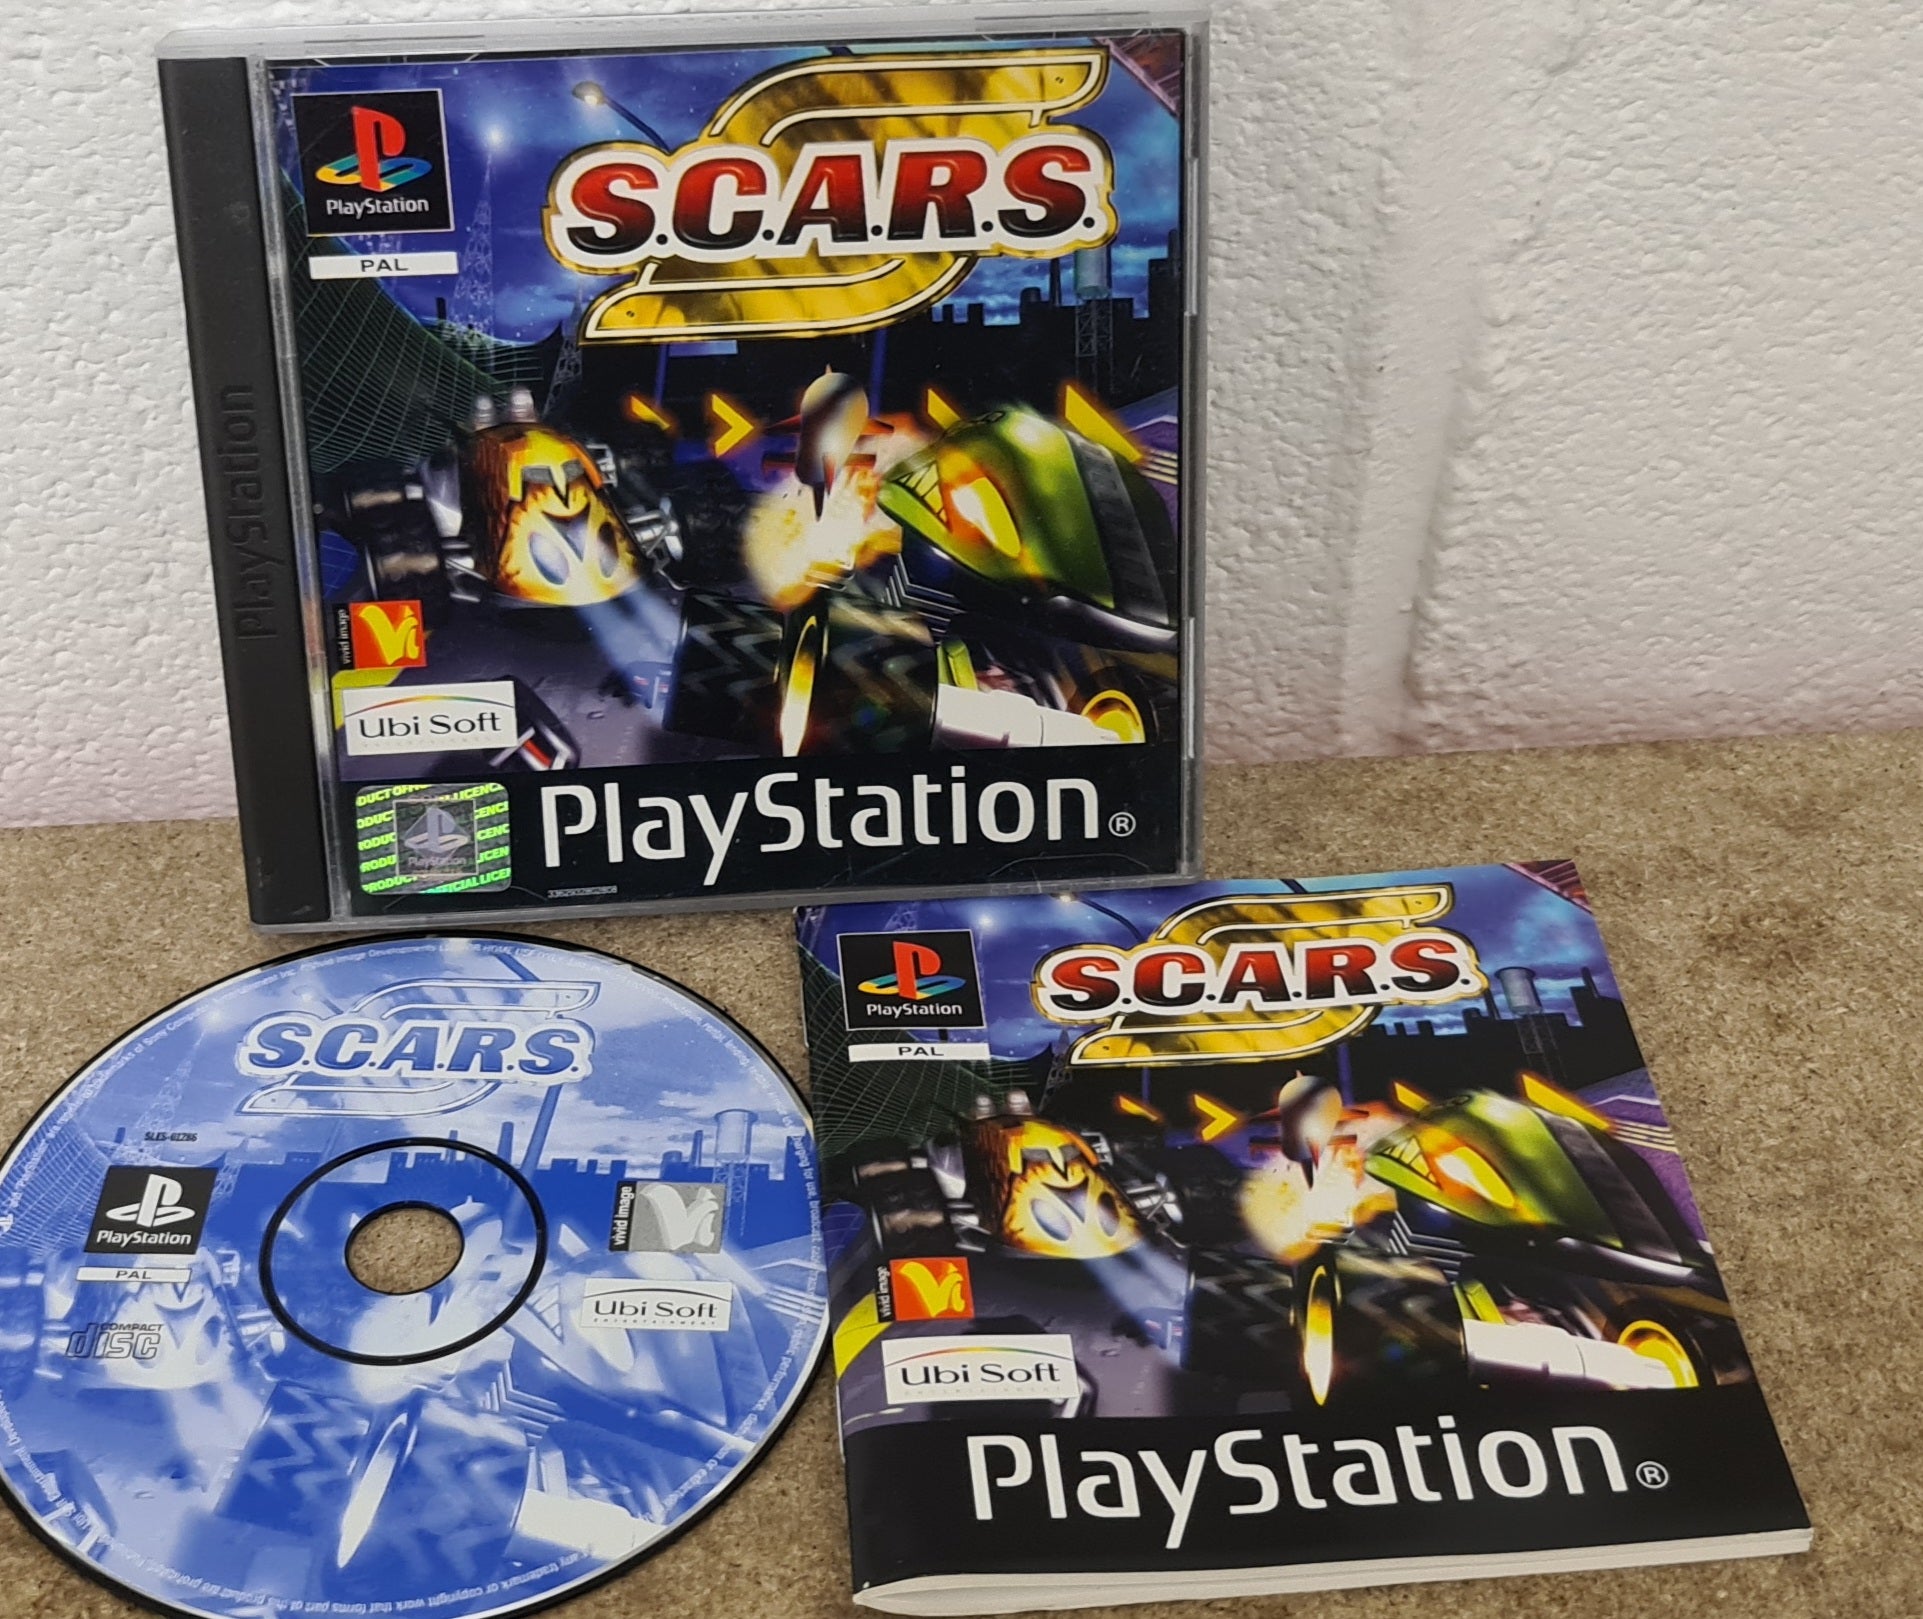 S.C.A.R.S. Sony Playstation 1 Game – Retro Gamer Heaven